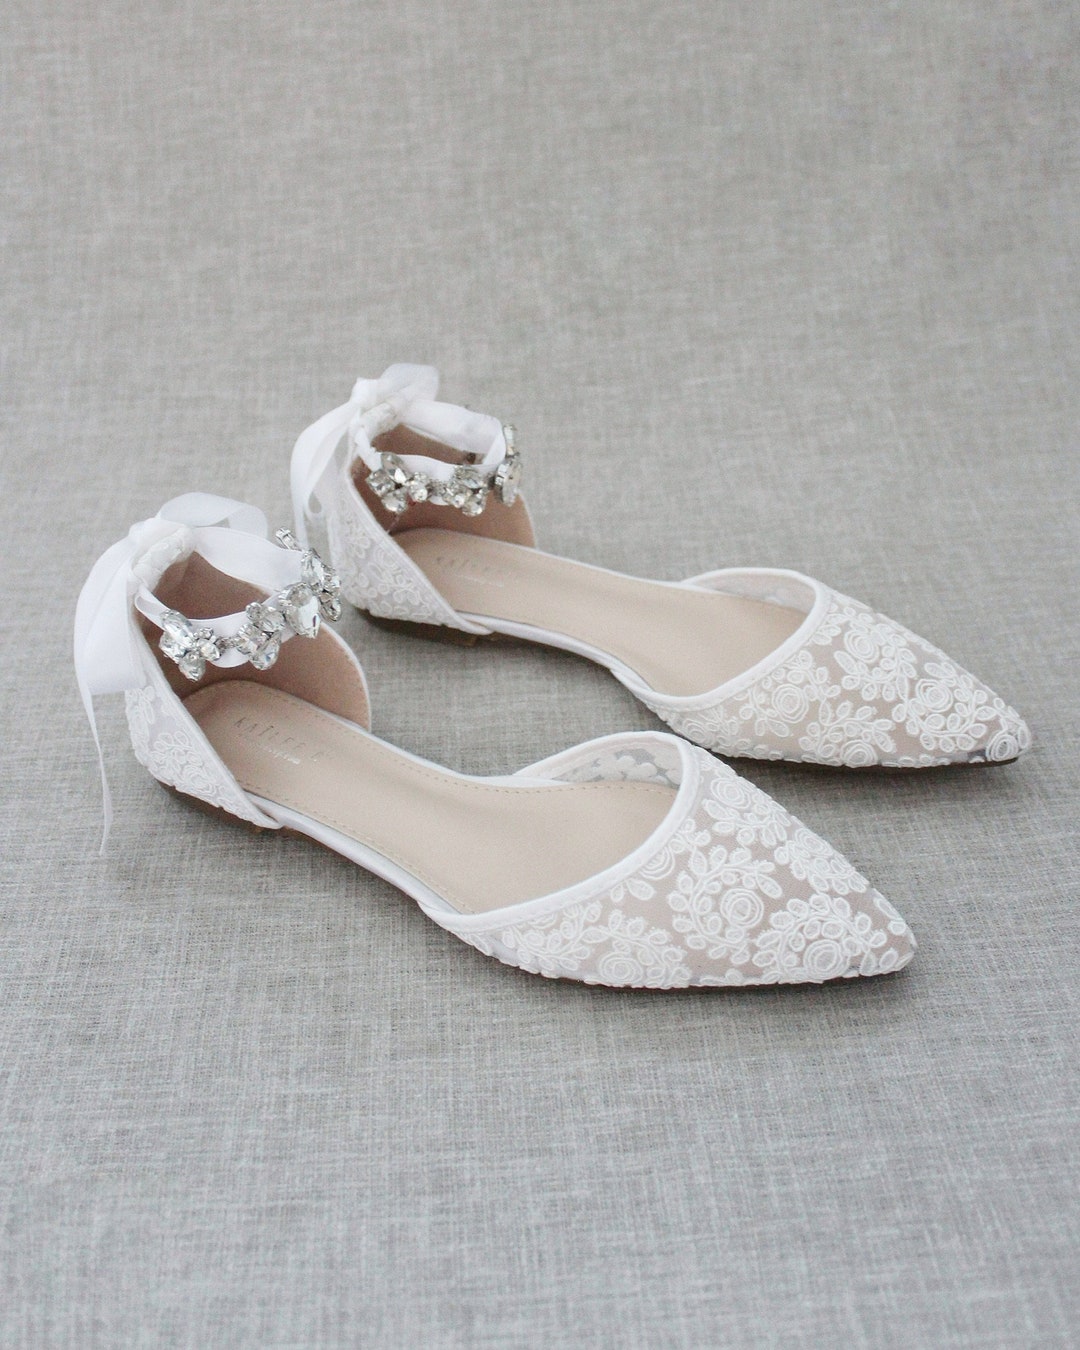 White Crochet Lace Pointy Toe Flats With NAVETTE CLUSTER - Etsy